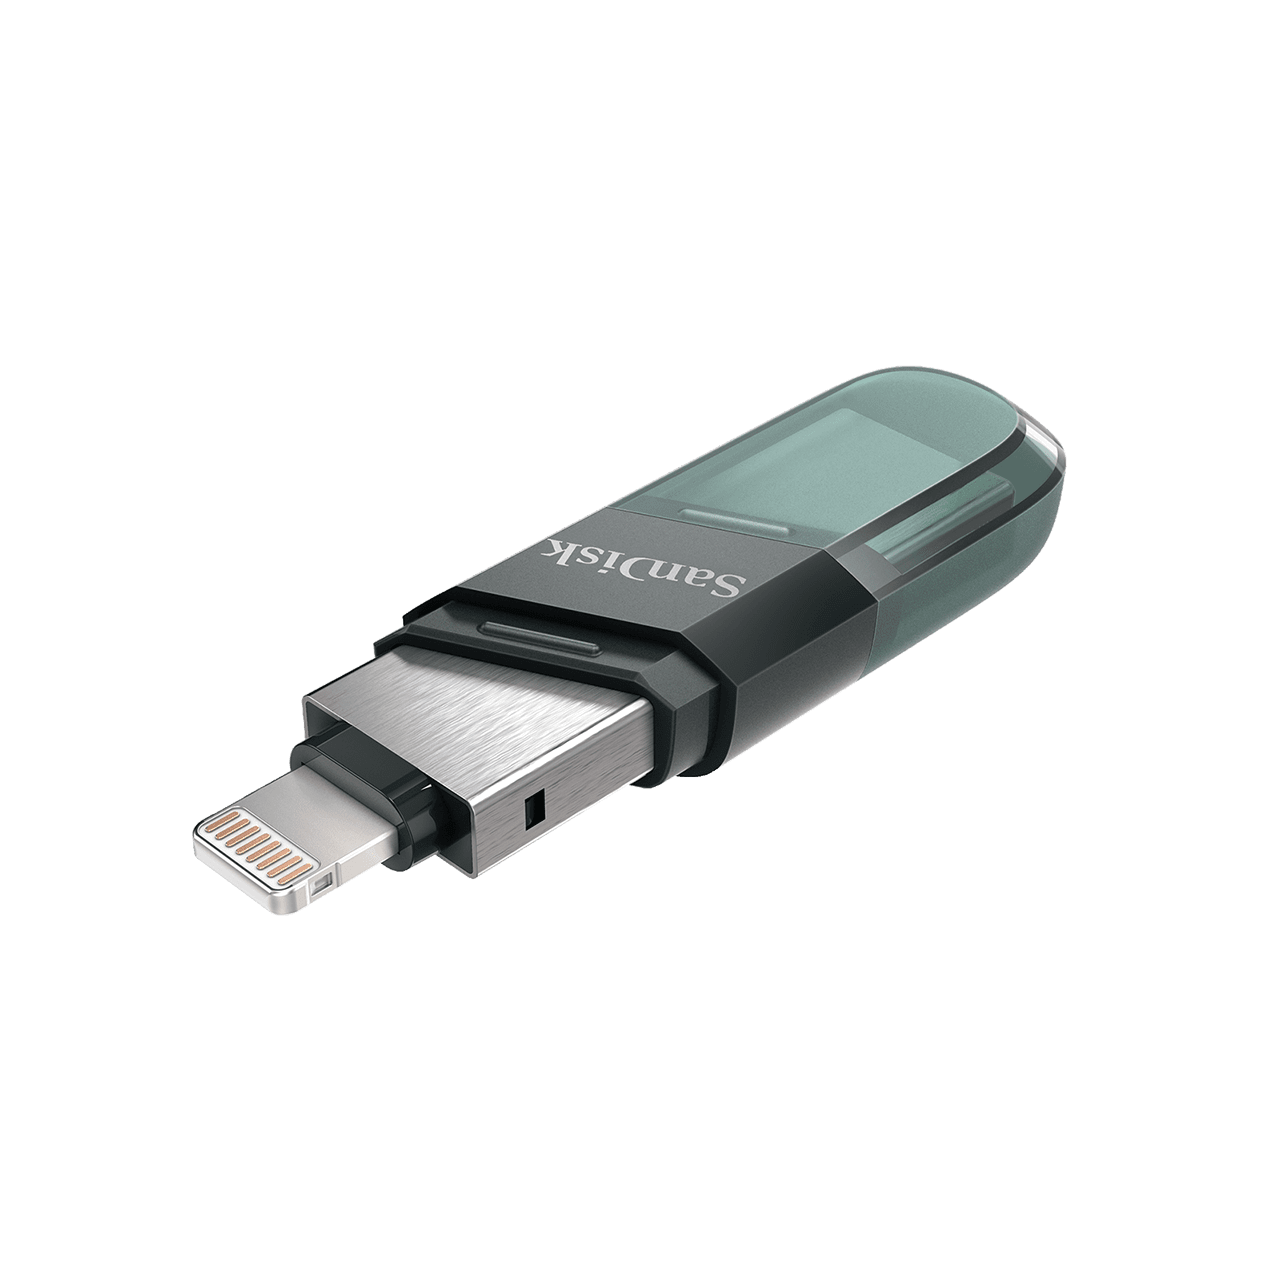 Sandisk OTG Flash Drive iXpand Flip with USB 3.1 and Lightning Connection, Compact Size, iXpand Drive Support, Plug and Play